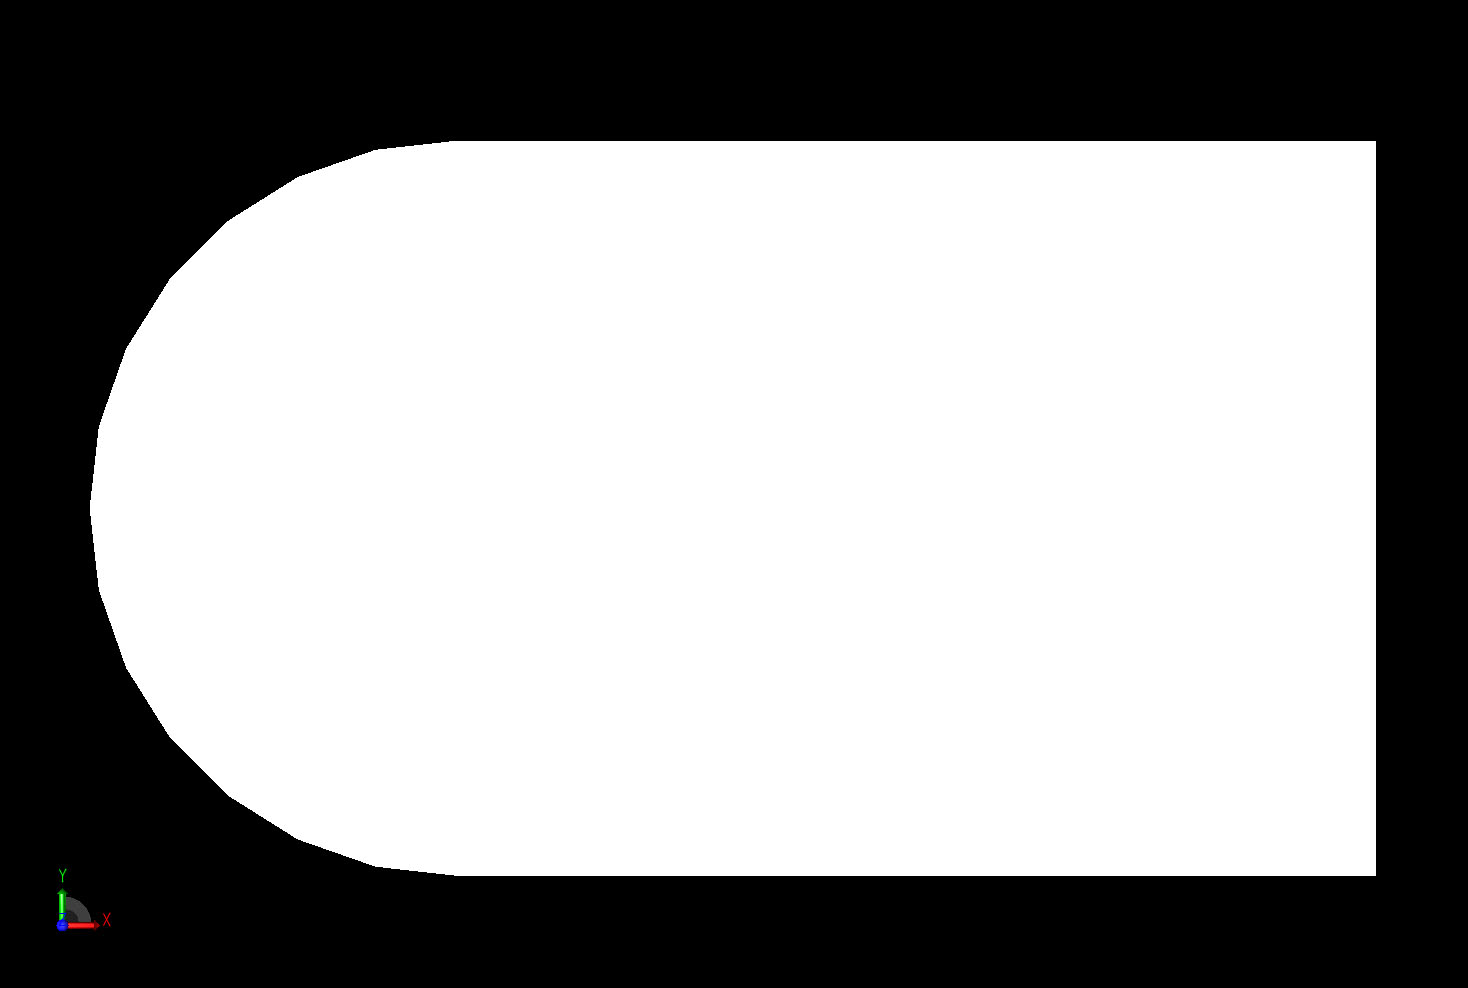 Figure 3The Plate Cylinder geometry.